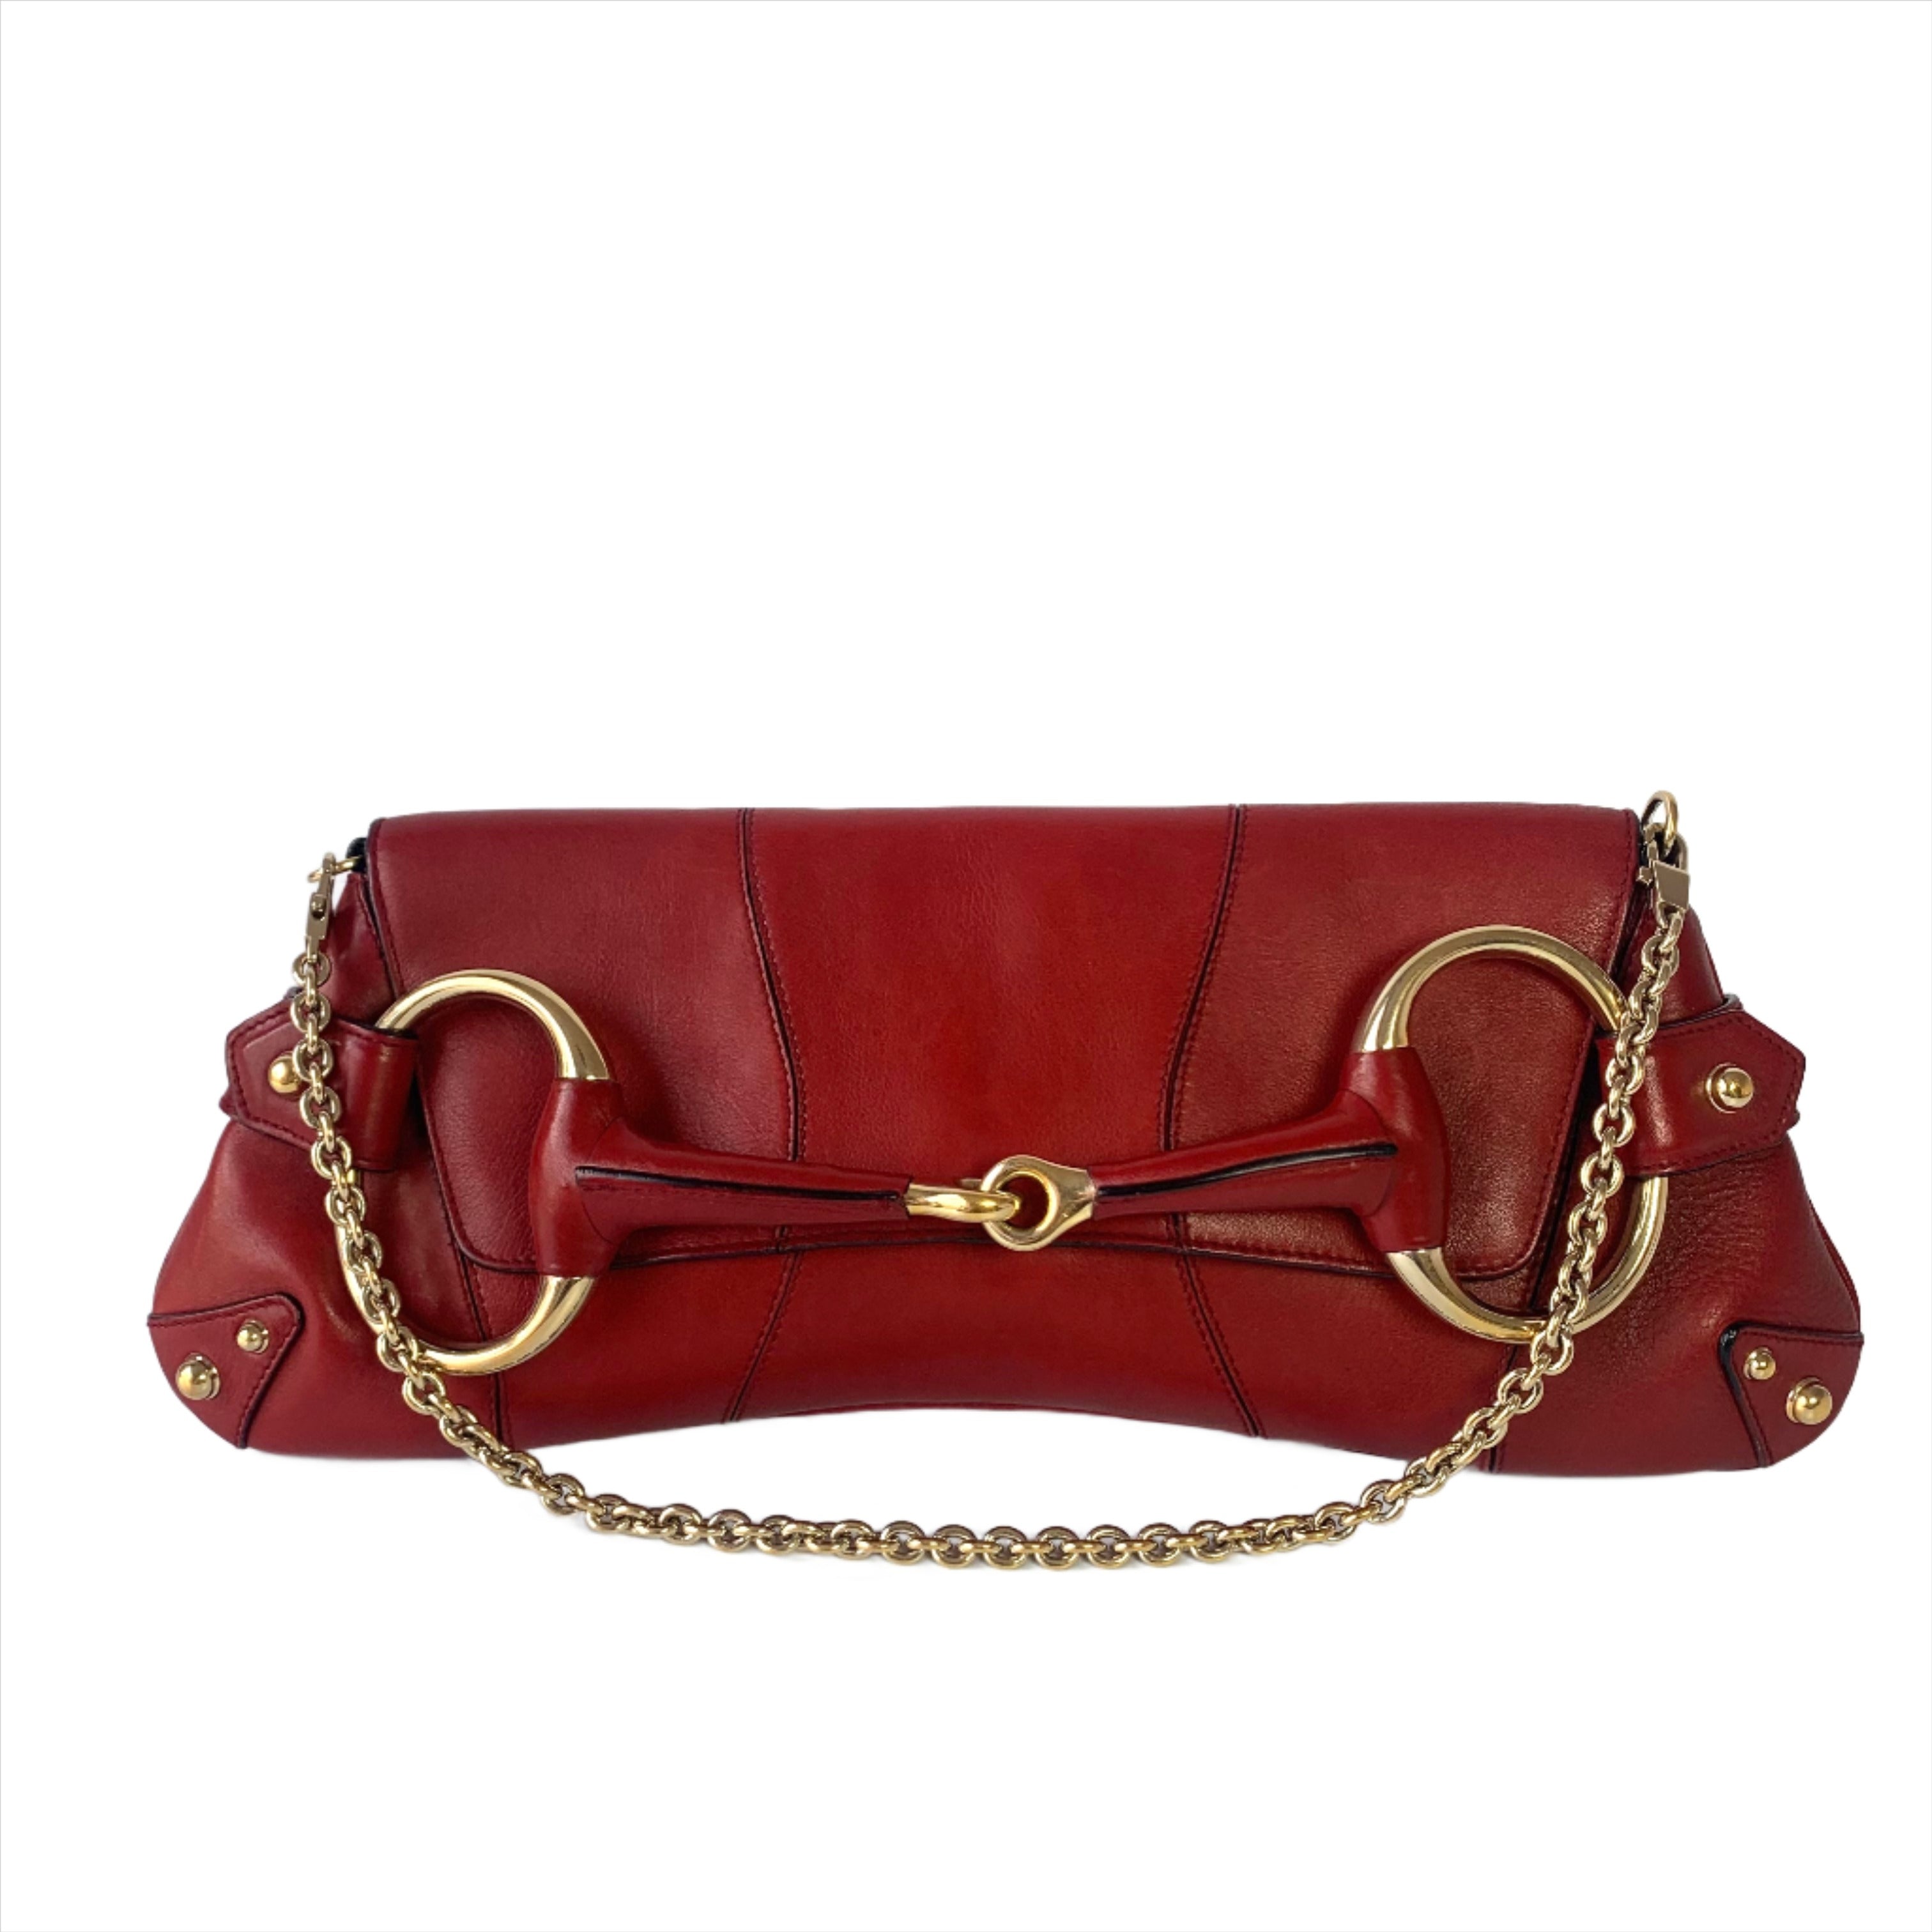 Sold Gucci Horsebit 1955 Chain leather bag in Red with gold studs